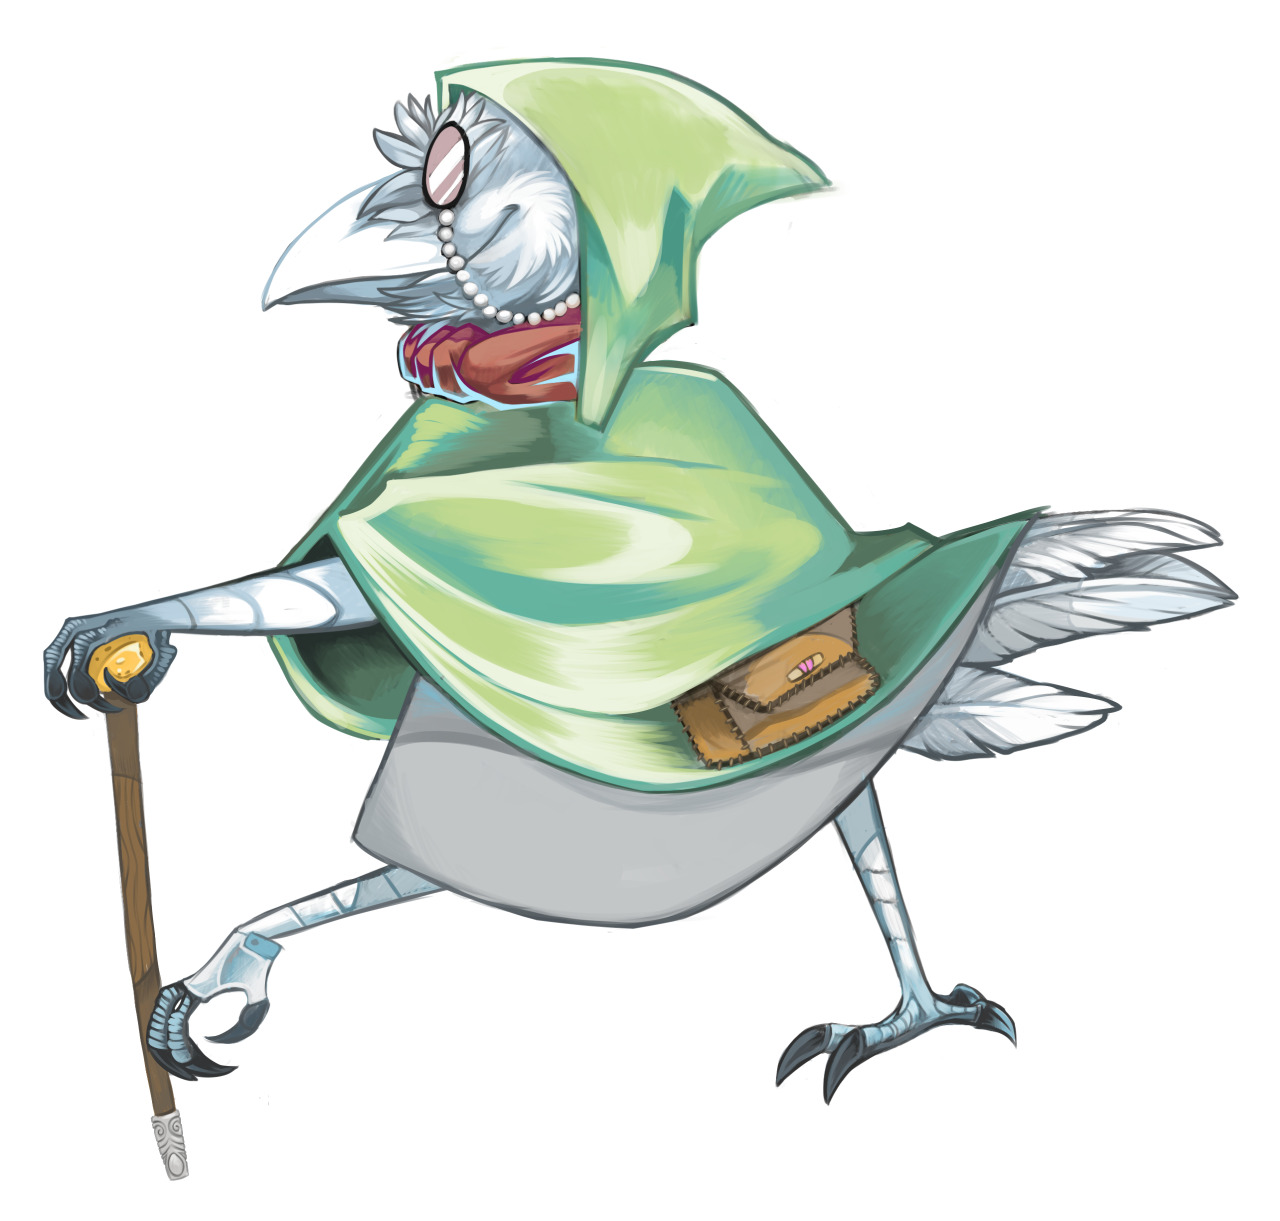 Granny Clink - A very old Kenku. Basically she just got tired of living by herself so she made it her mission to join a band of adventurers. She doesn’t have a lot of battle skill but she’ll make sure they’re never hungry and always have a few of grandmas homemade potions. She basically got called clink as a nickname on account of always having either knitting or crochet needles with her.  #little lonely lady wishes to join adventurers: will provide food at all times #kenku#dnd#dnd oc #Dungeons and Dragons